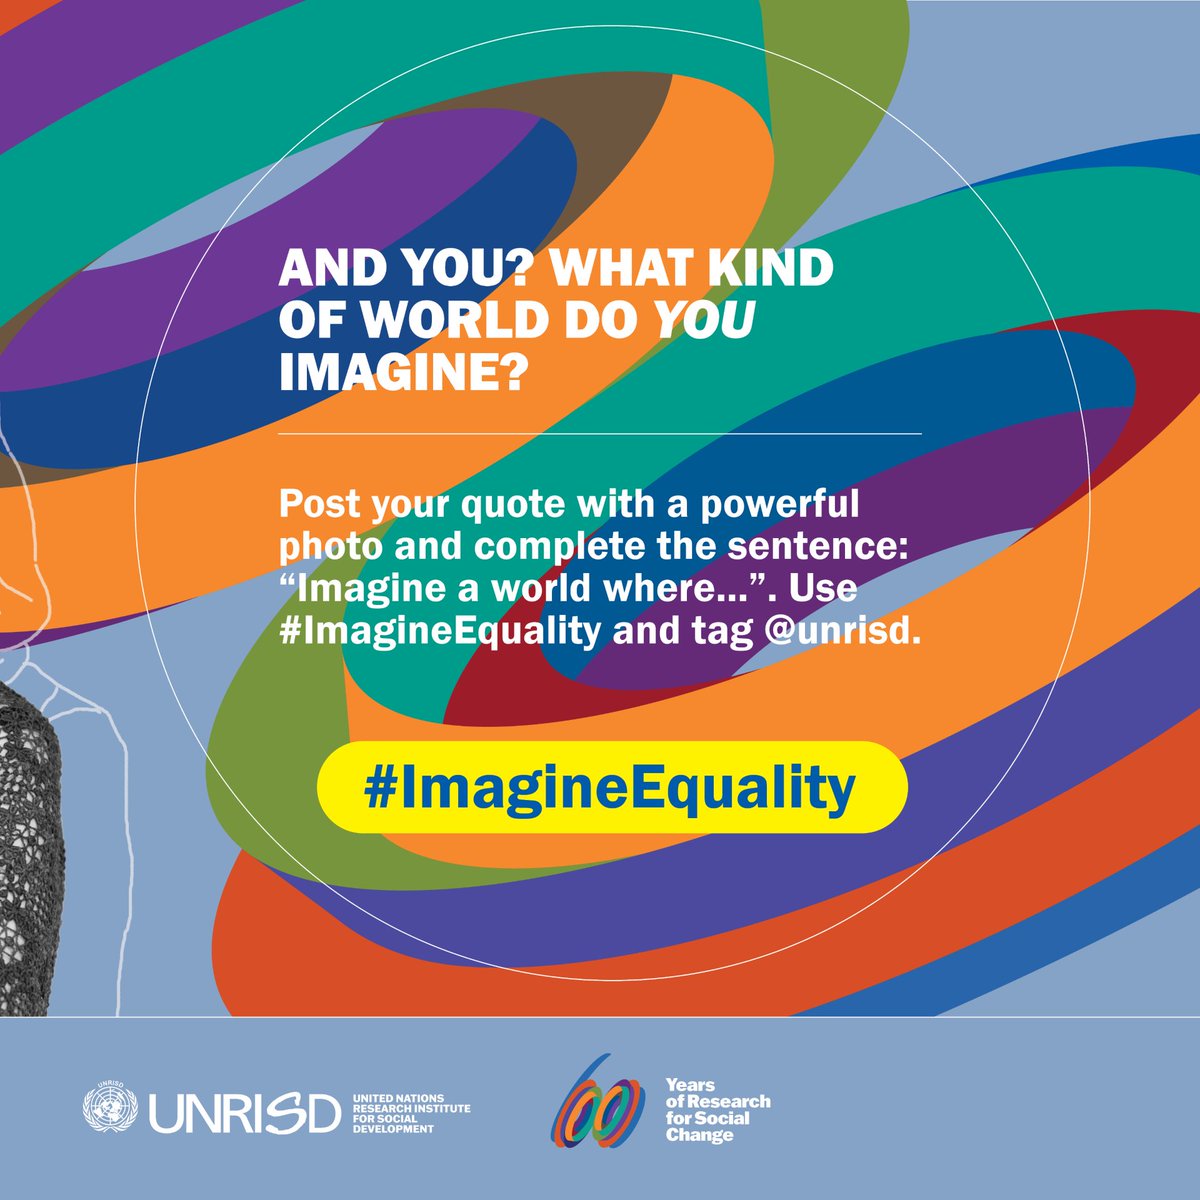 Imagine a world where #ClimateJustice is not just an aspiration but a reality, shaping a greener, fairer, and more sustainable planet for all. Join the #ImagineEquality campaign to support @UNRISD & shape a better tomorrow: unrisd.org/en/activities/…